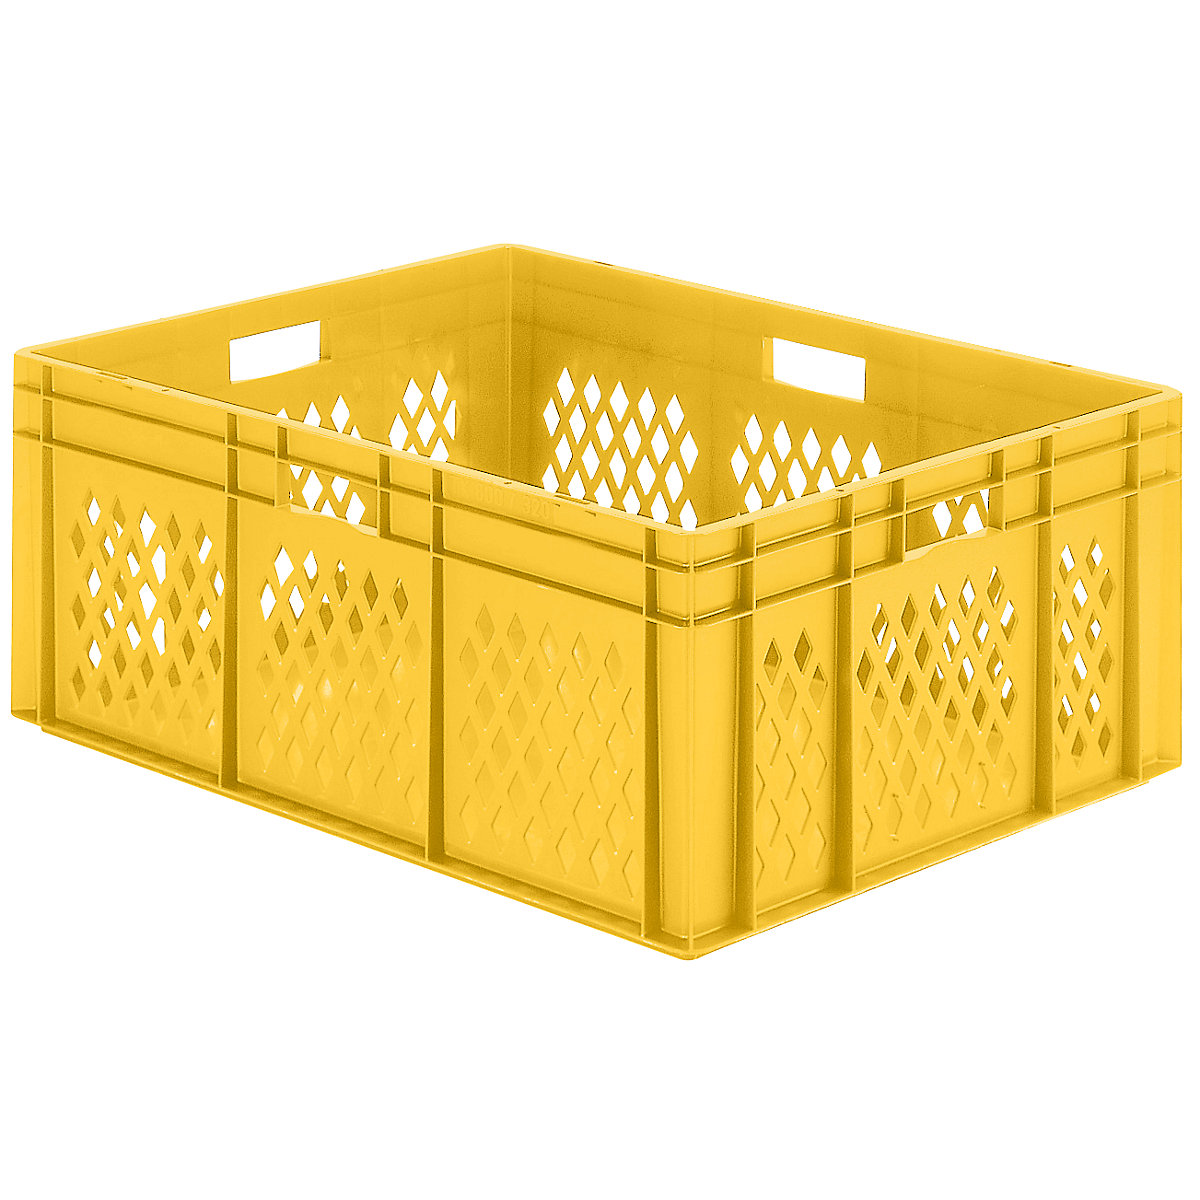 Euro stacking container, perforated walls, closed base, LxWxH 800 x 600 x 320 mm, yellow, pack of 2